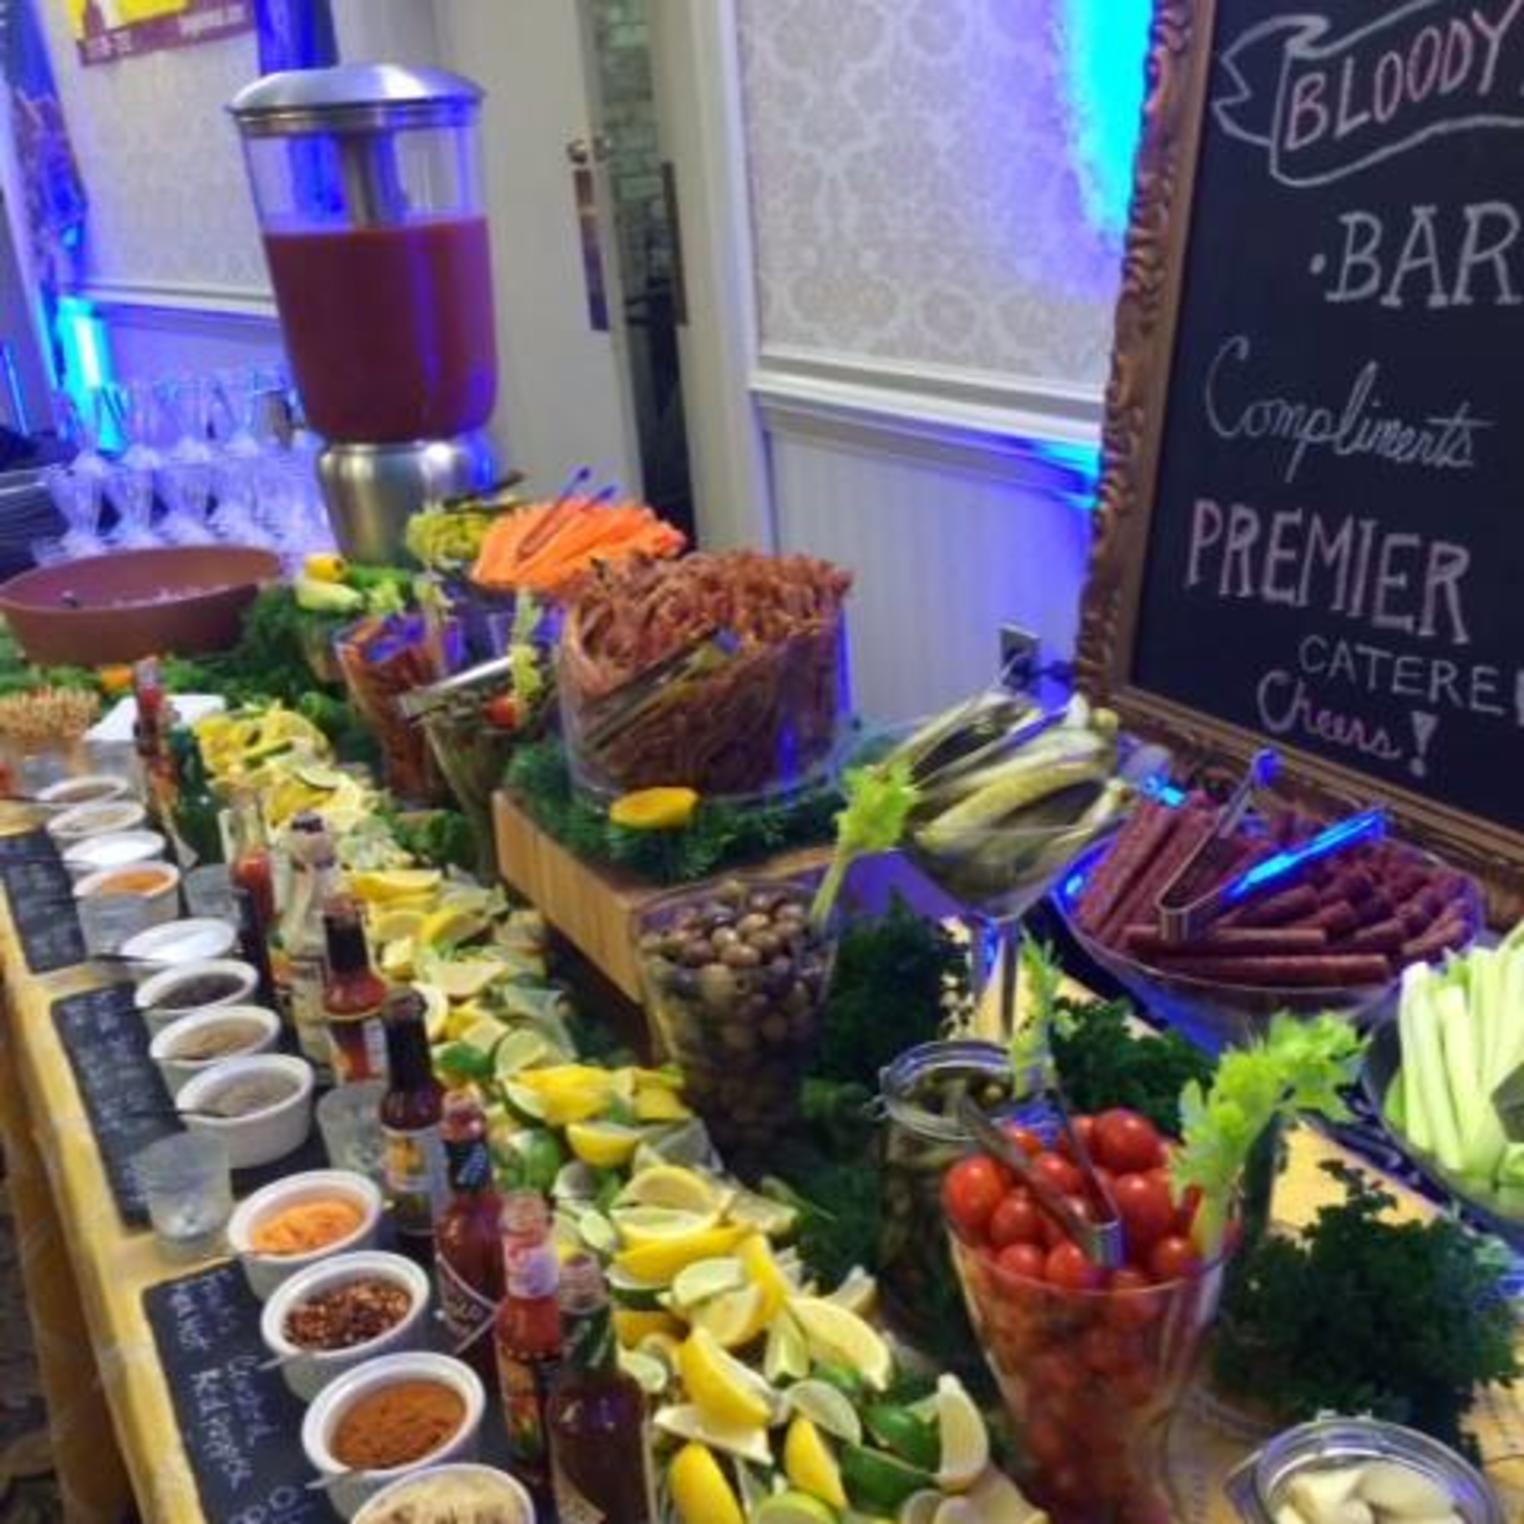 Premier Caterers